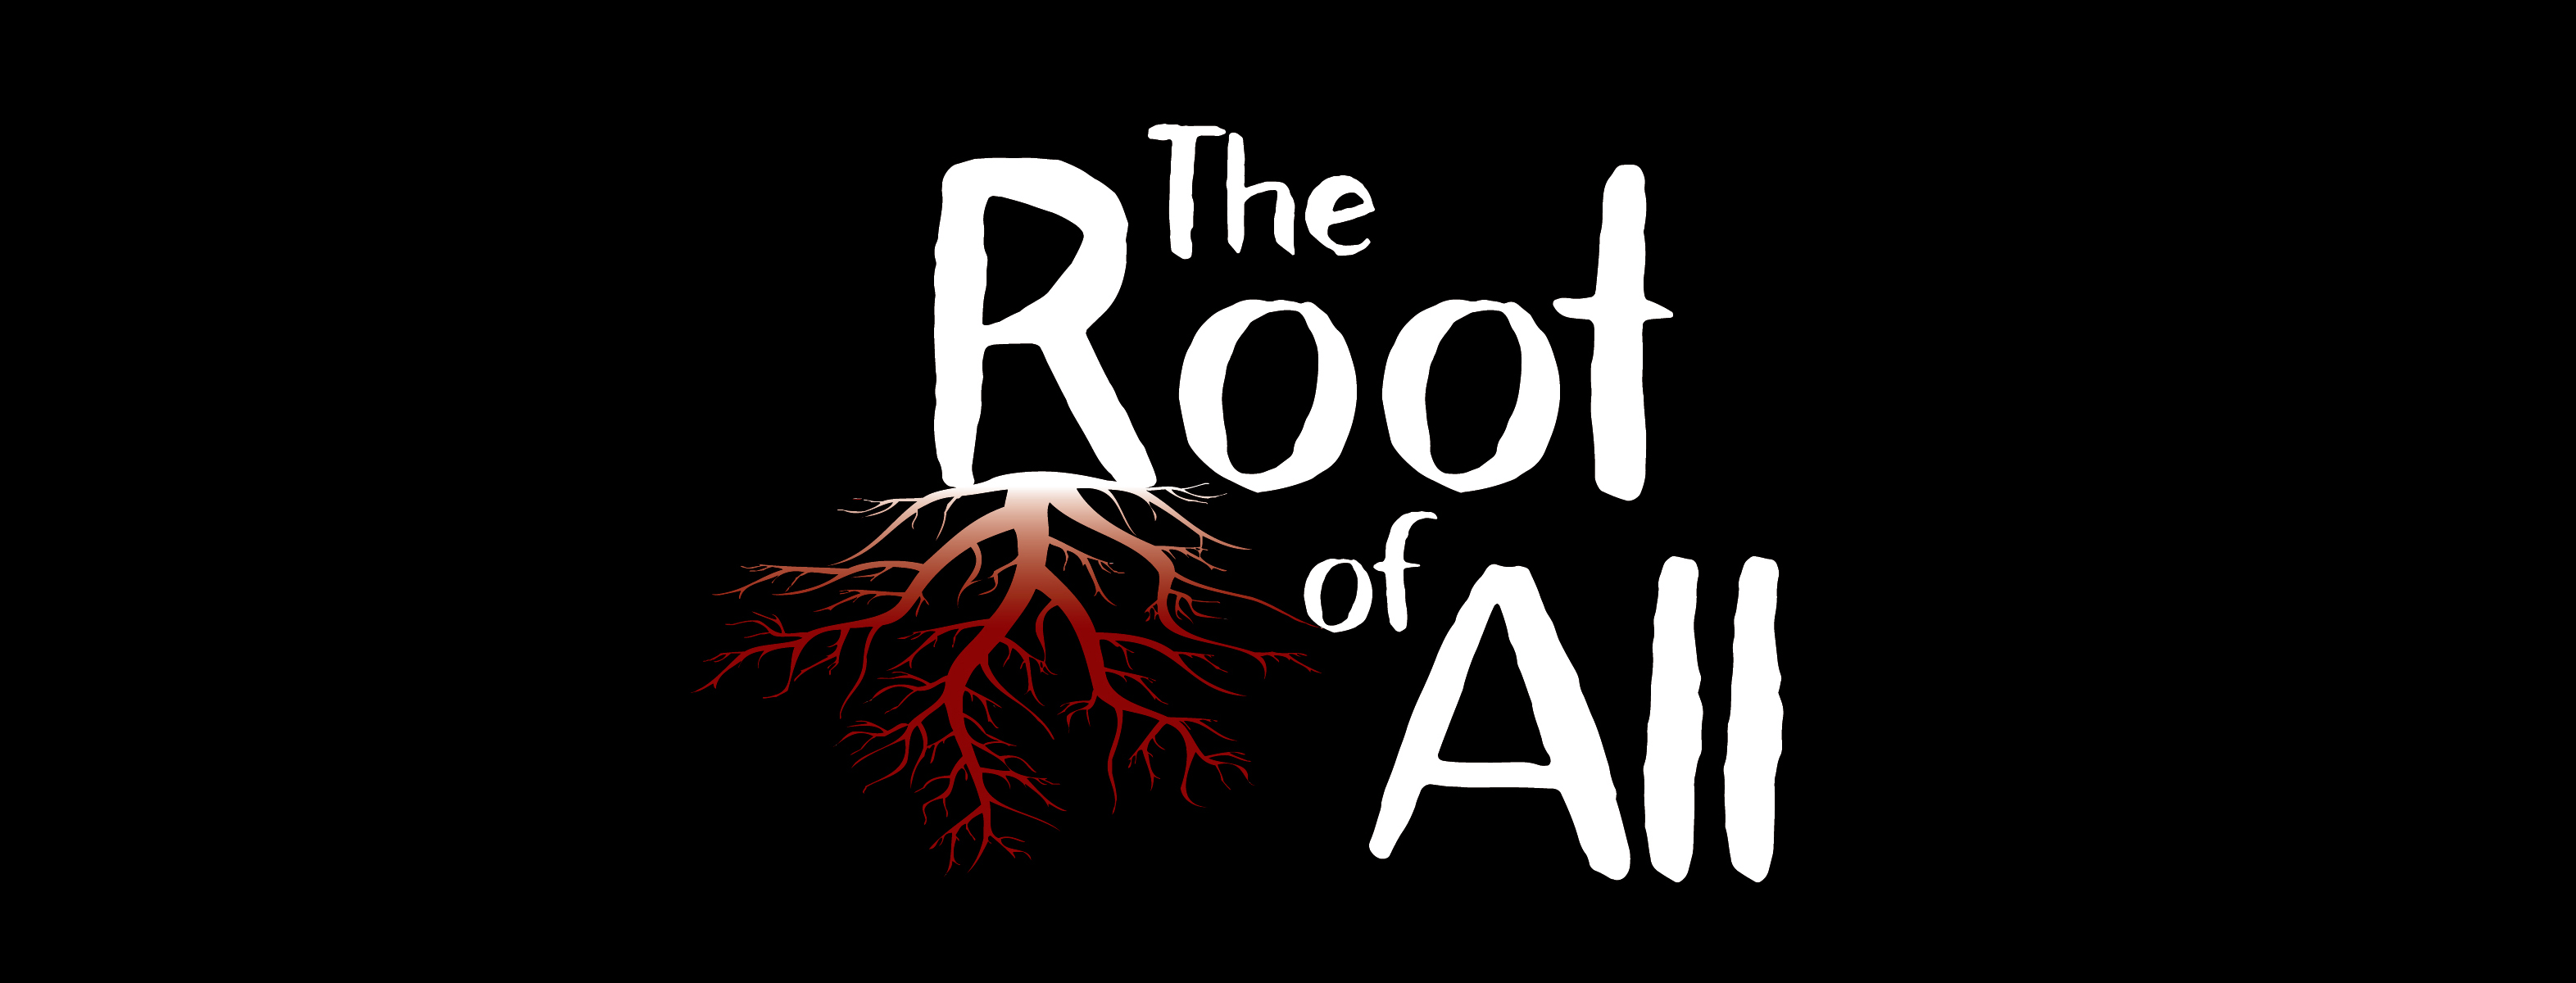 The Root of All (2020) постер